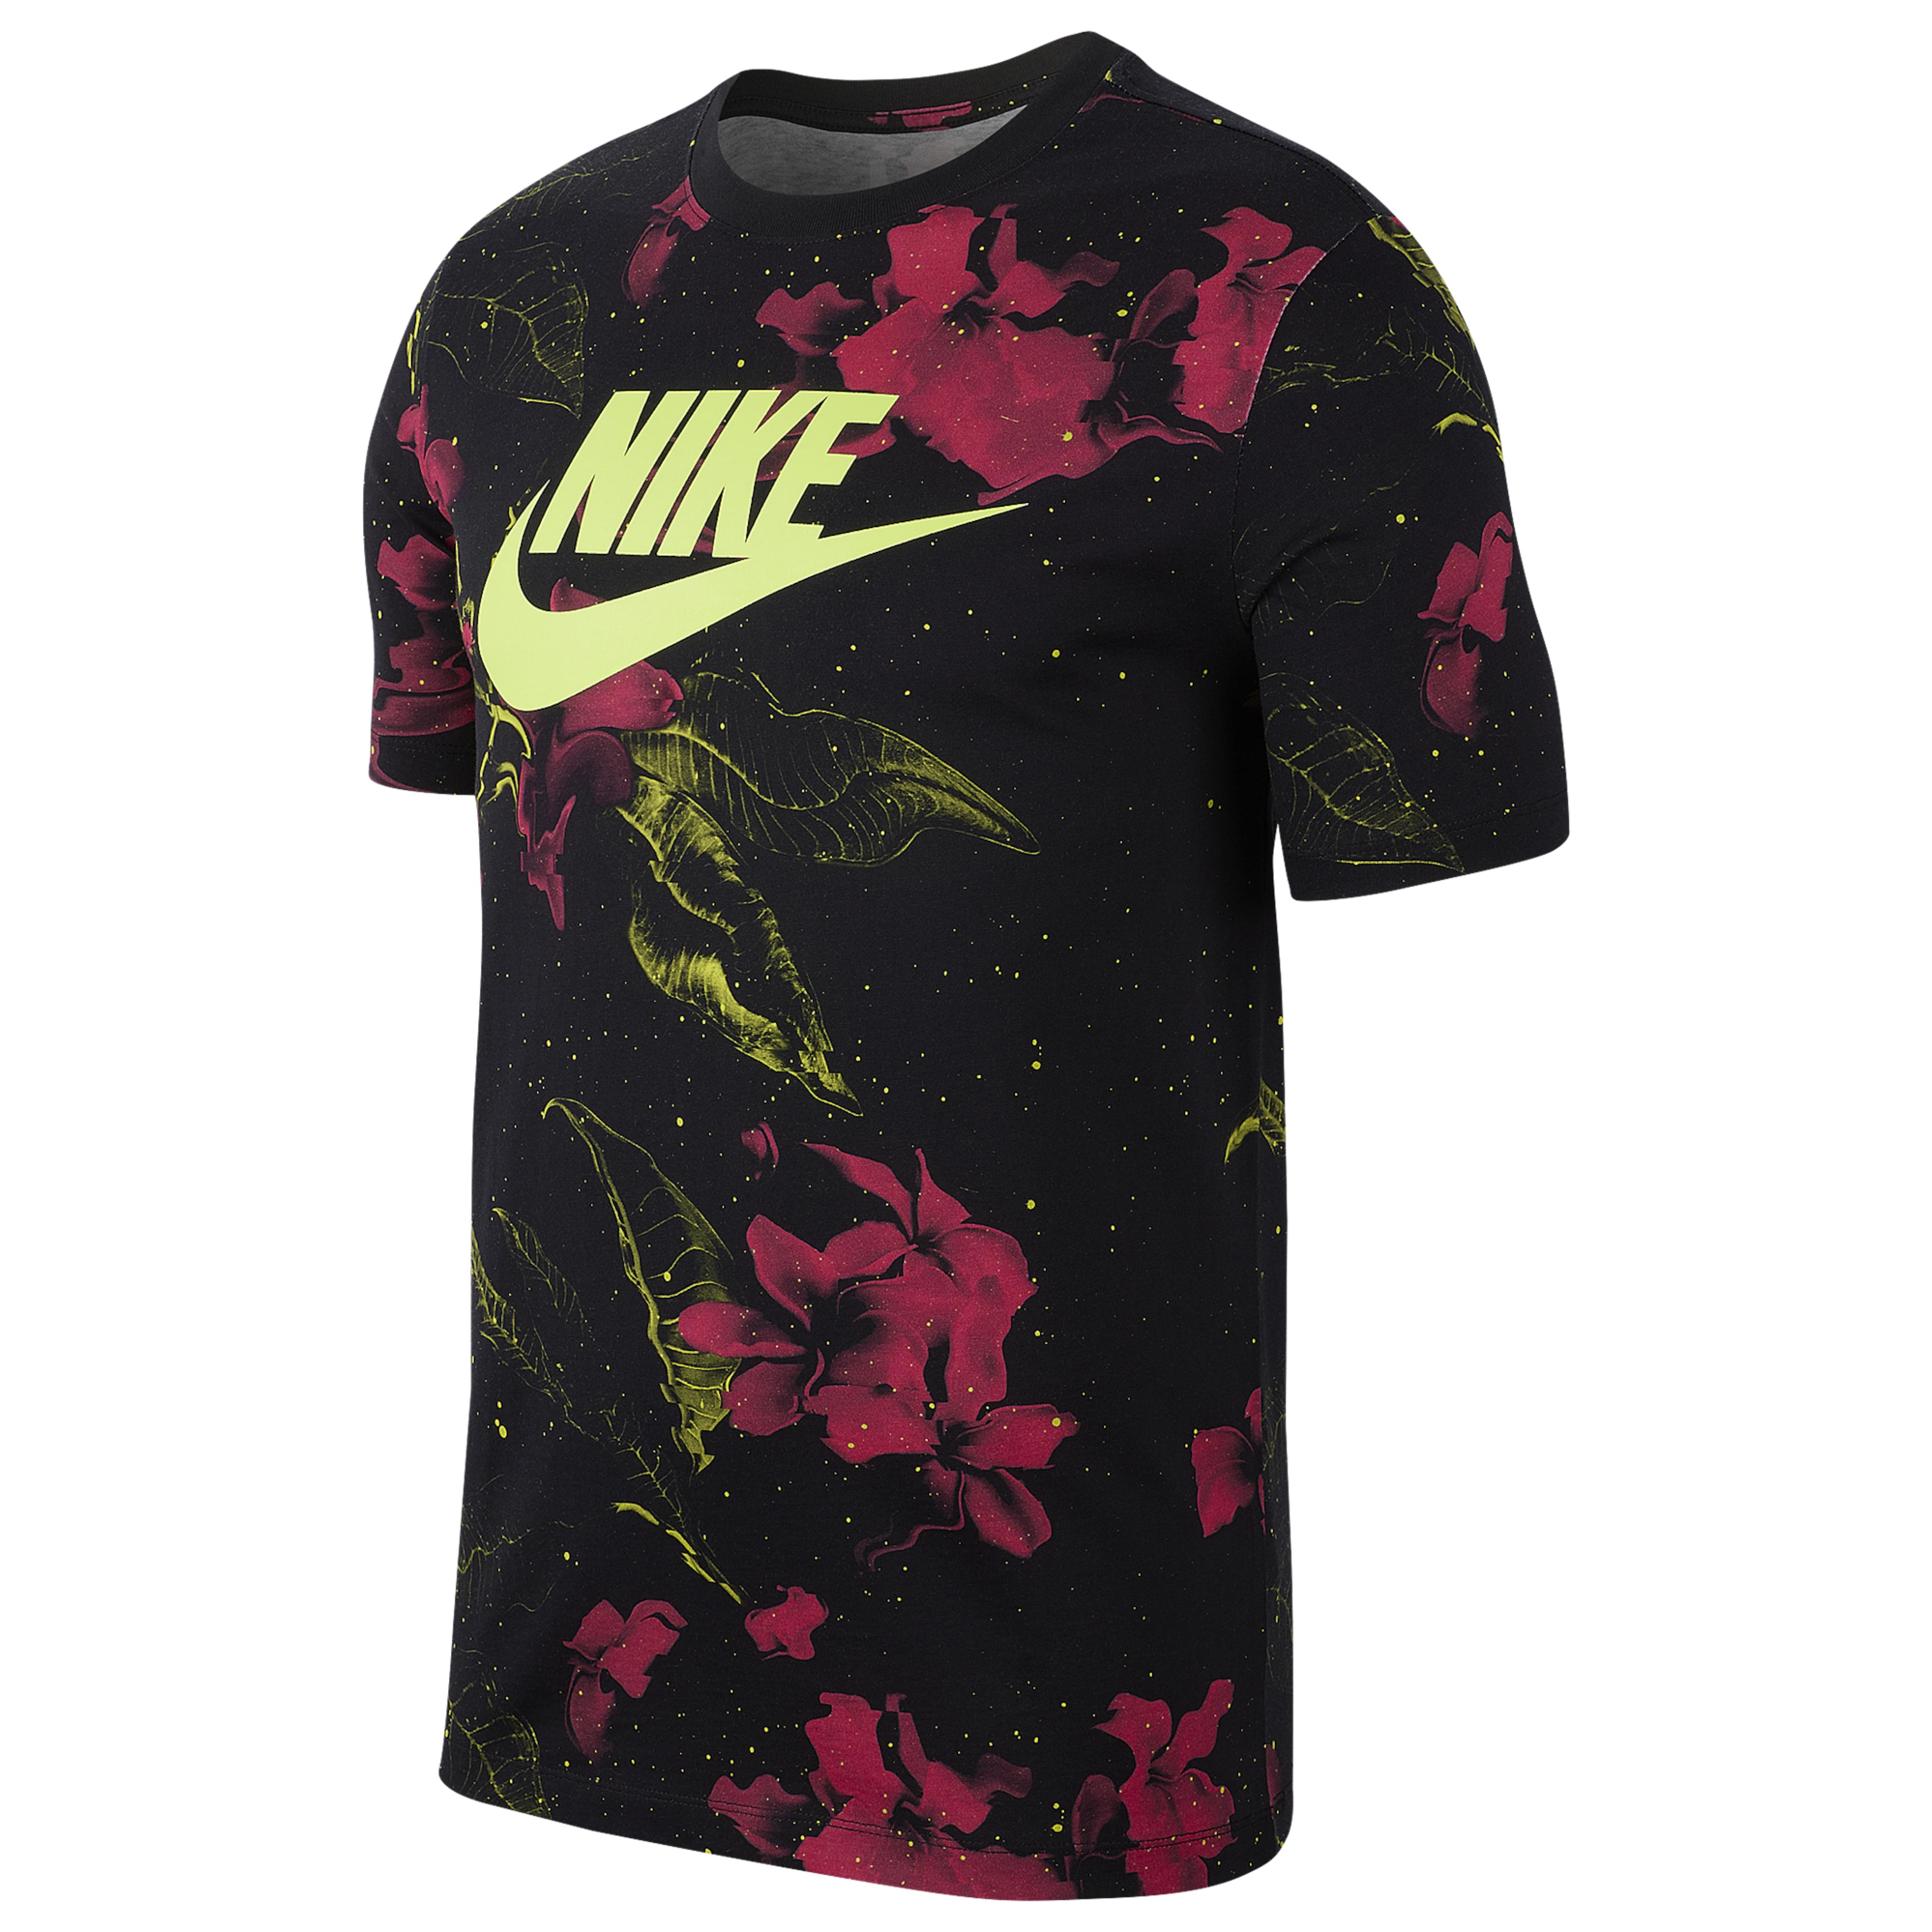 Nike Cotton Pink Limeade T-shirt in Black for Men - Lyst